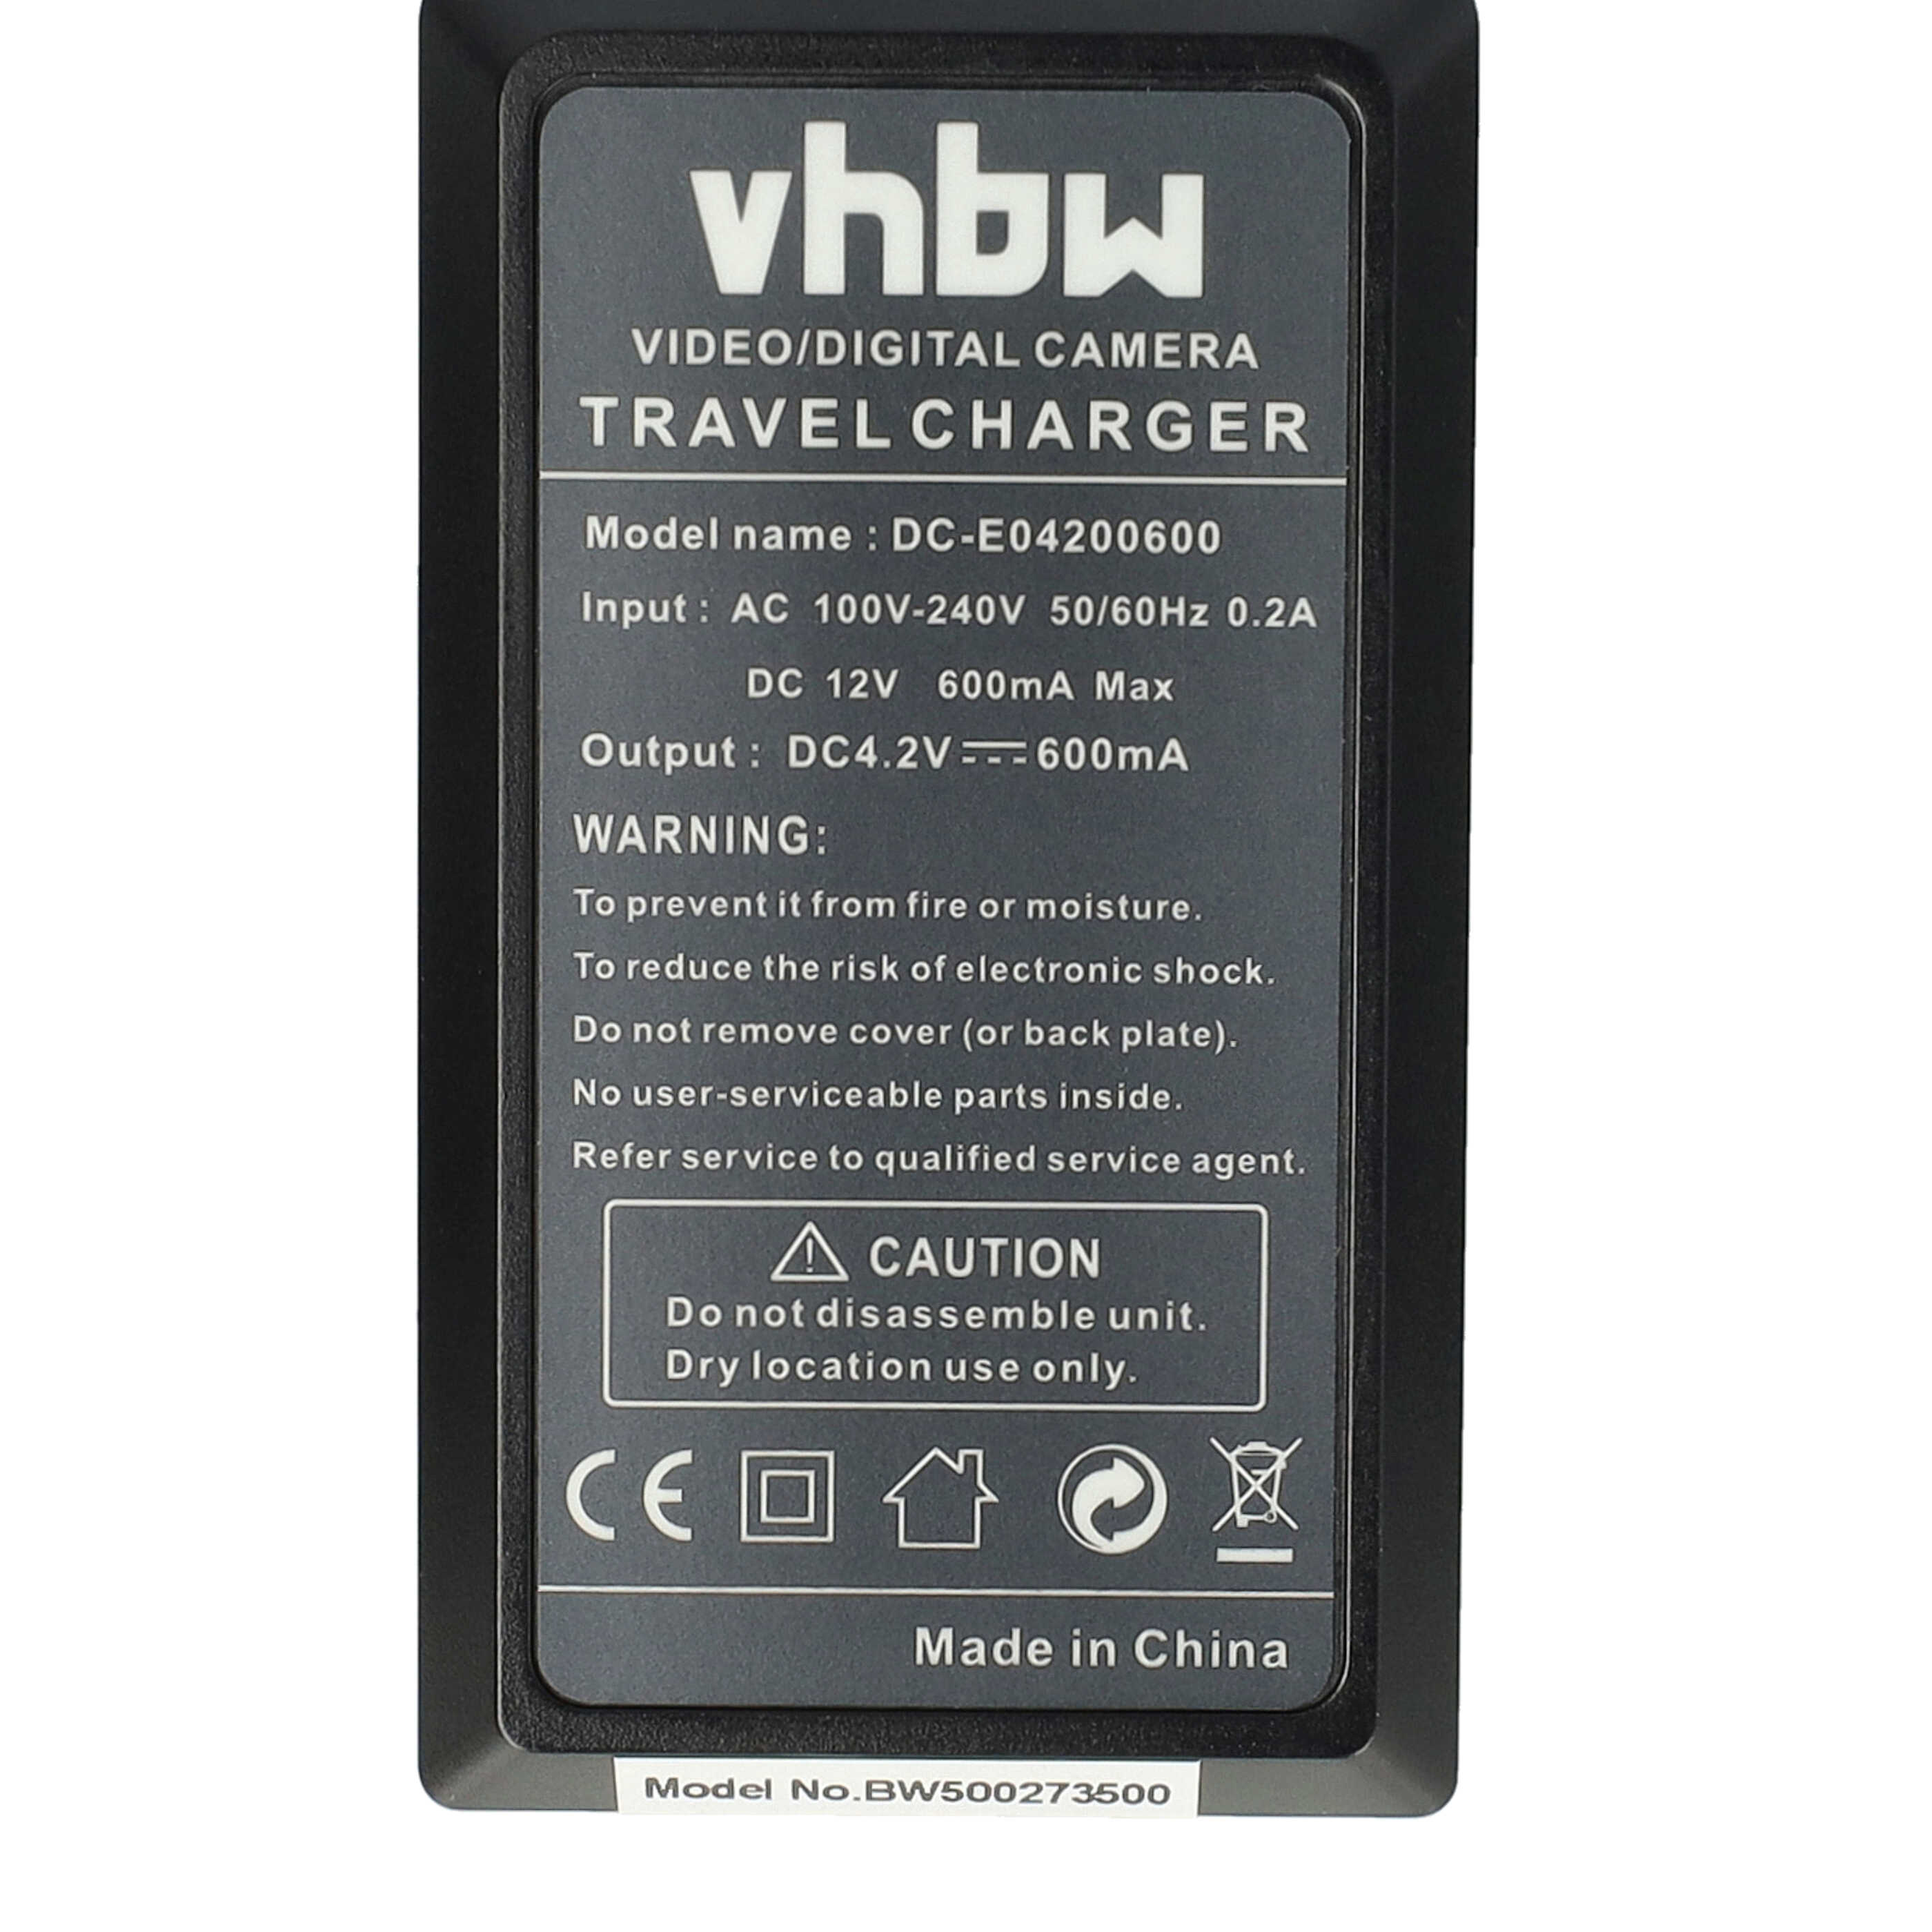 Battery Charger suitable for Sony NP-FT1 Camera etc. - 0.6 A, 4.2 V